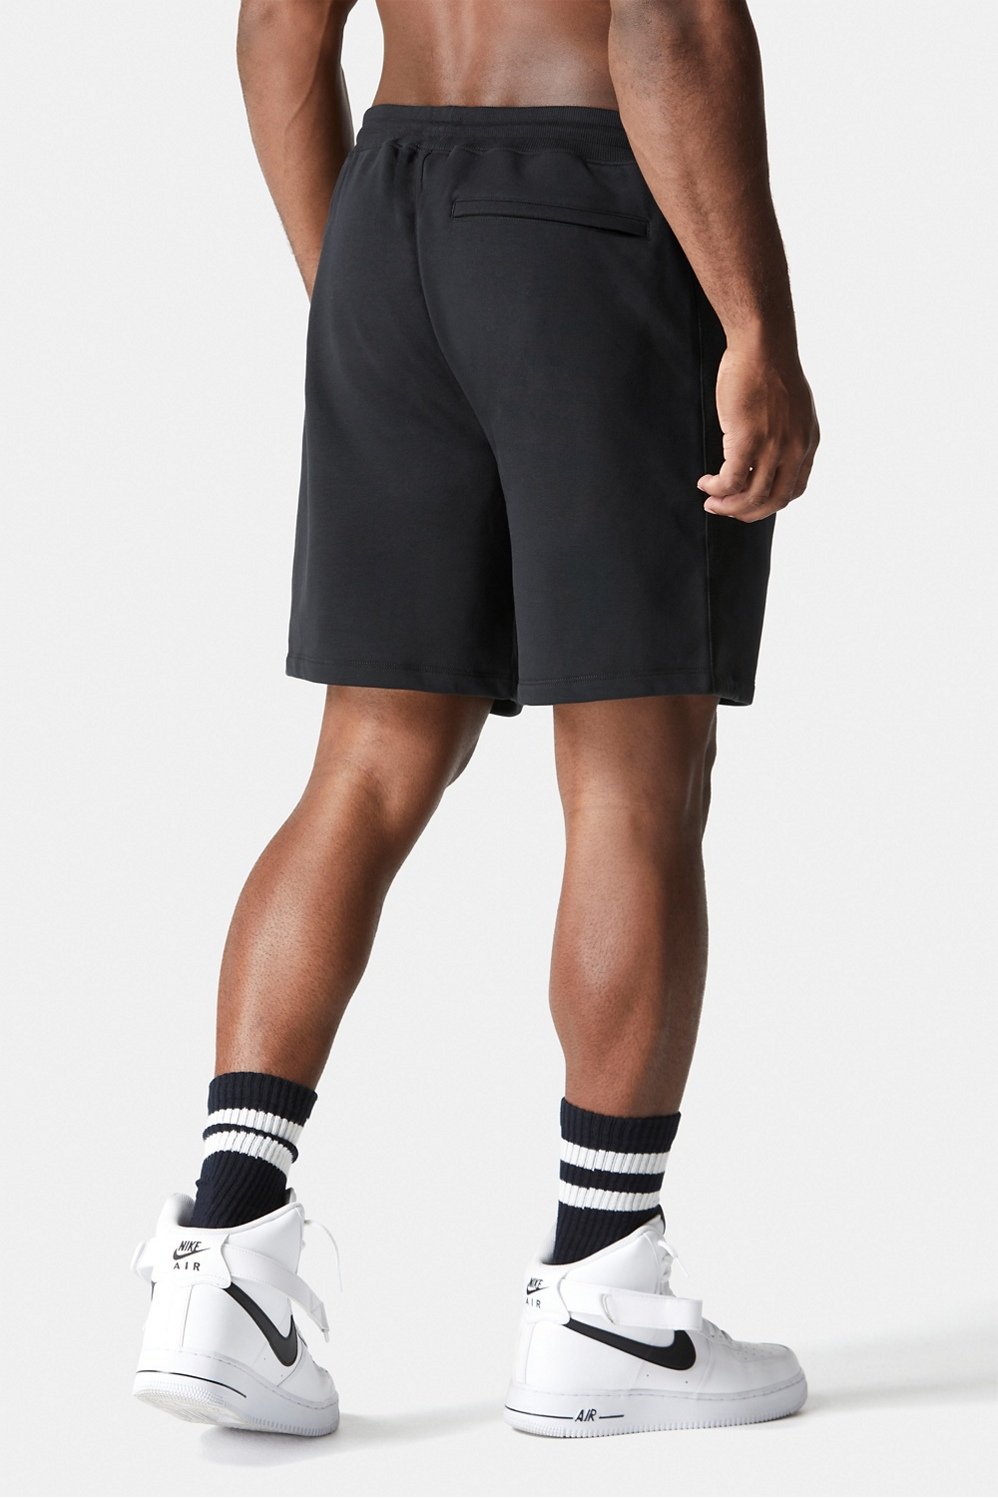 Pinecrest ::: FABLETICS MADNESS — LIMITED TIME ONLY $19 ELITE SHORTS :::  Fabletics